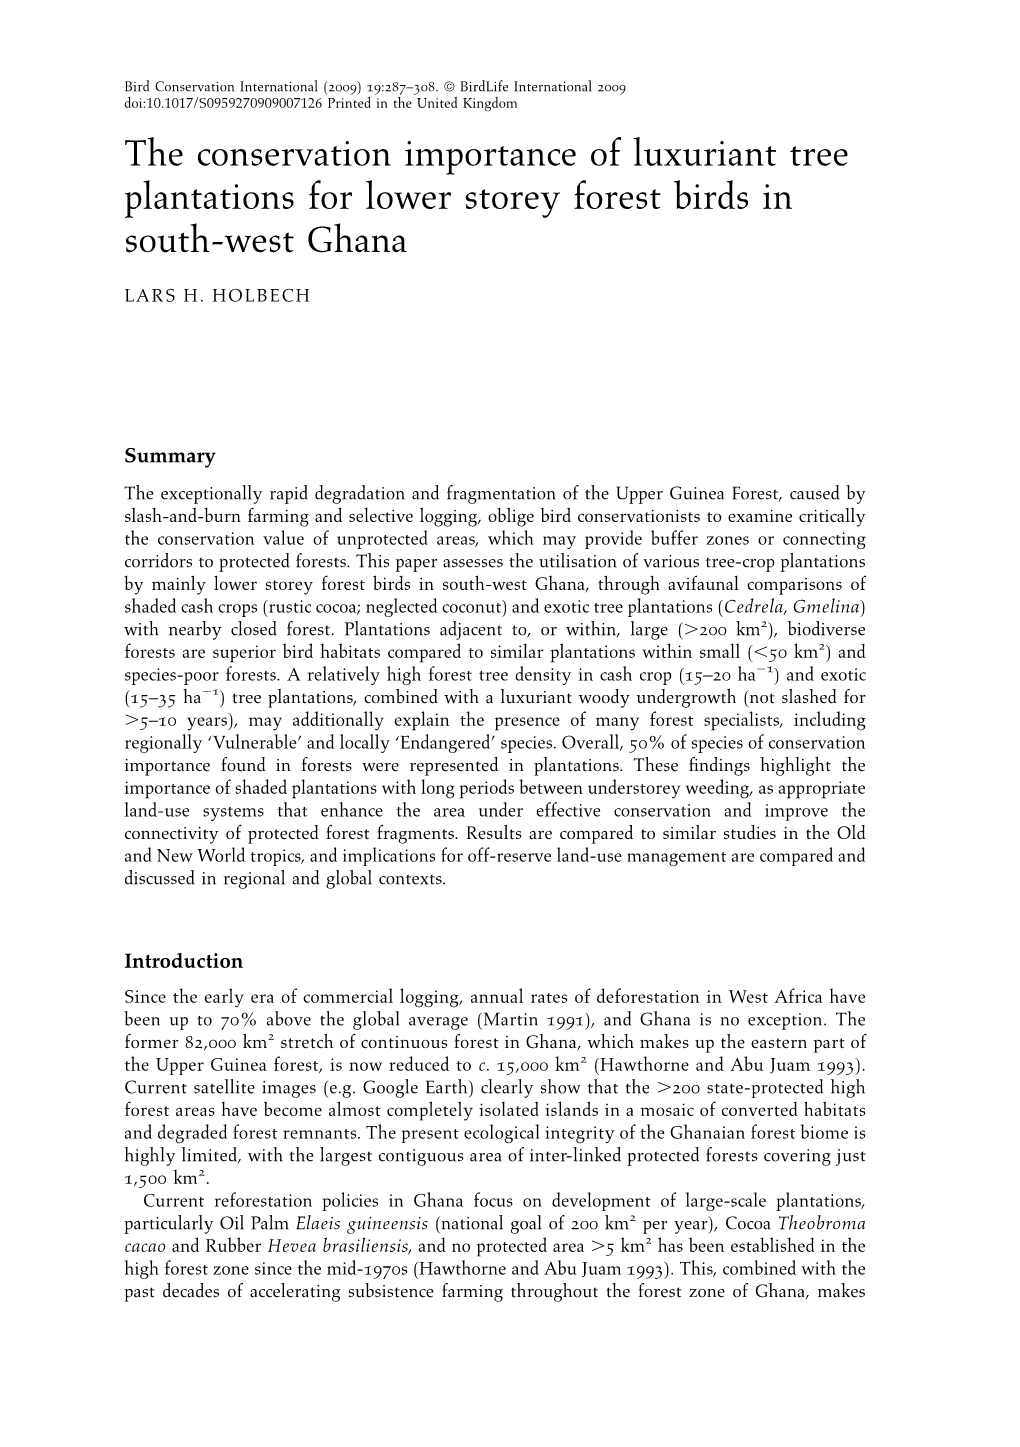 The Conservation Importance of Luxuriant Tree Plantations for Lower Storey Forest Birds in South-West Ghana